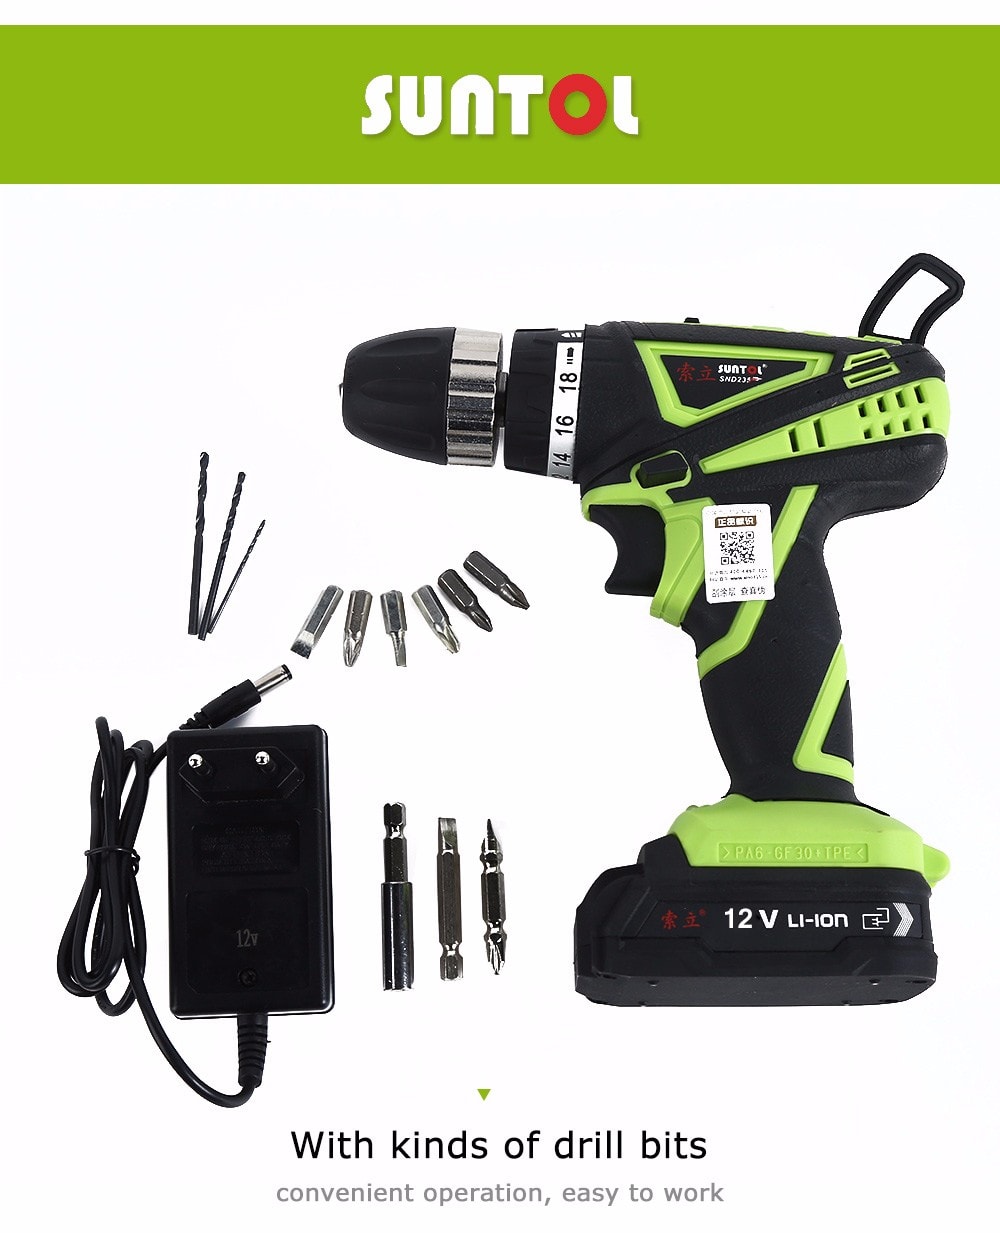 SUNTOL 12V Multi-function Lithium-ion Battery Electric Drill Screwdriver Power Tool- Black and Green